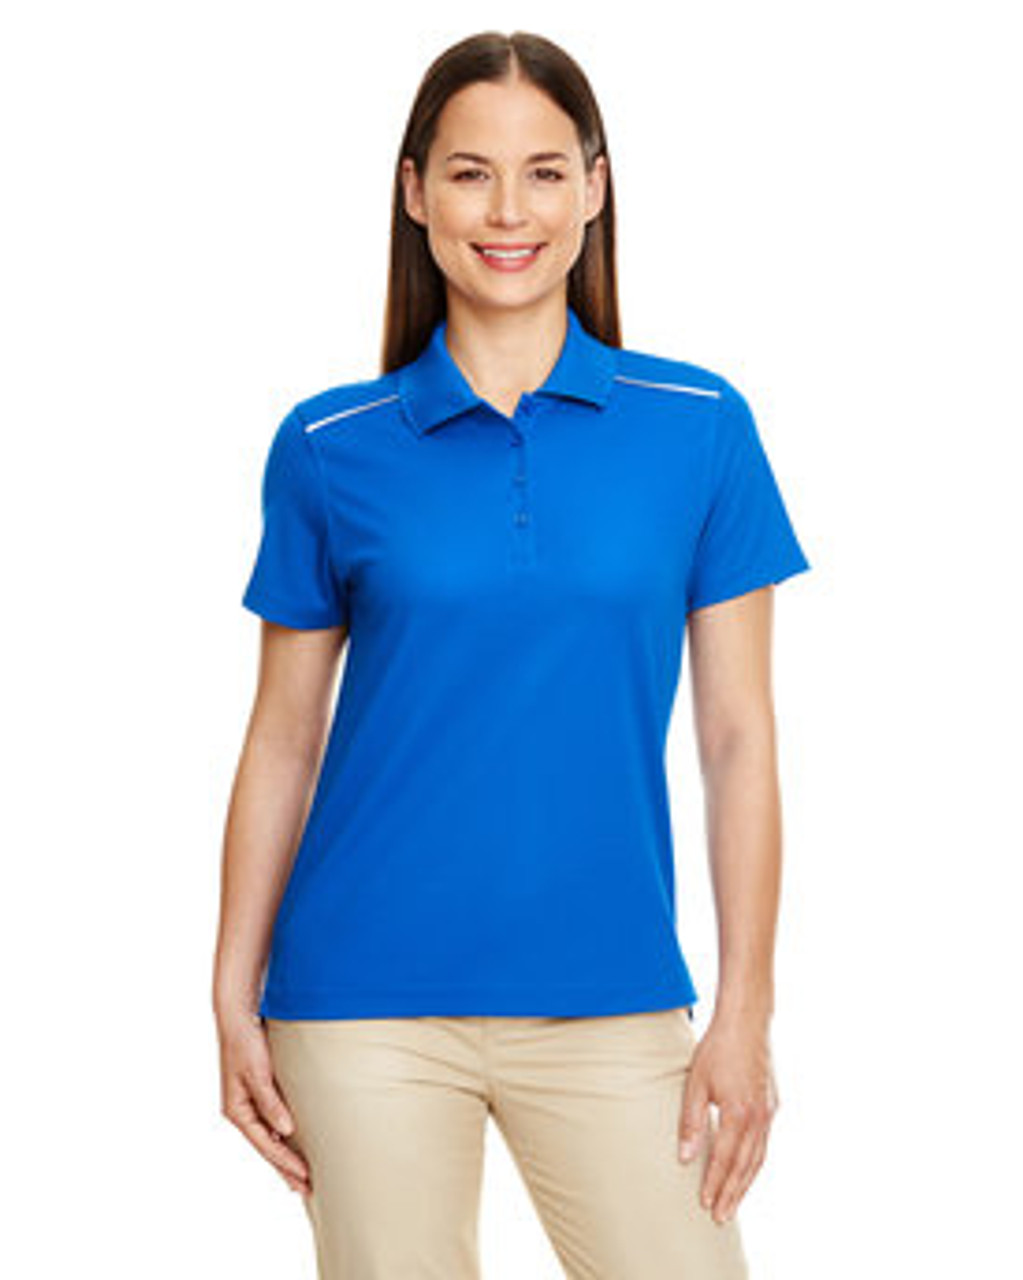 Core 365 Ladies' Radiant Performance Piqué Polo with Reflective Piping 78181R True Royal